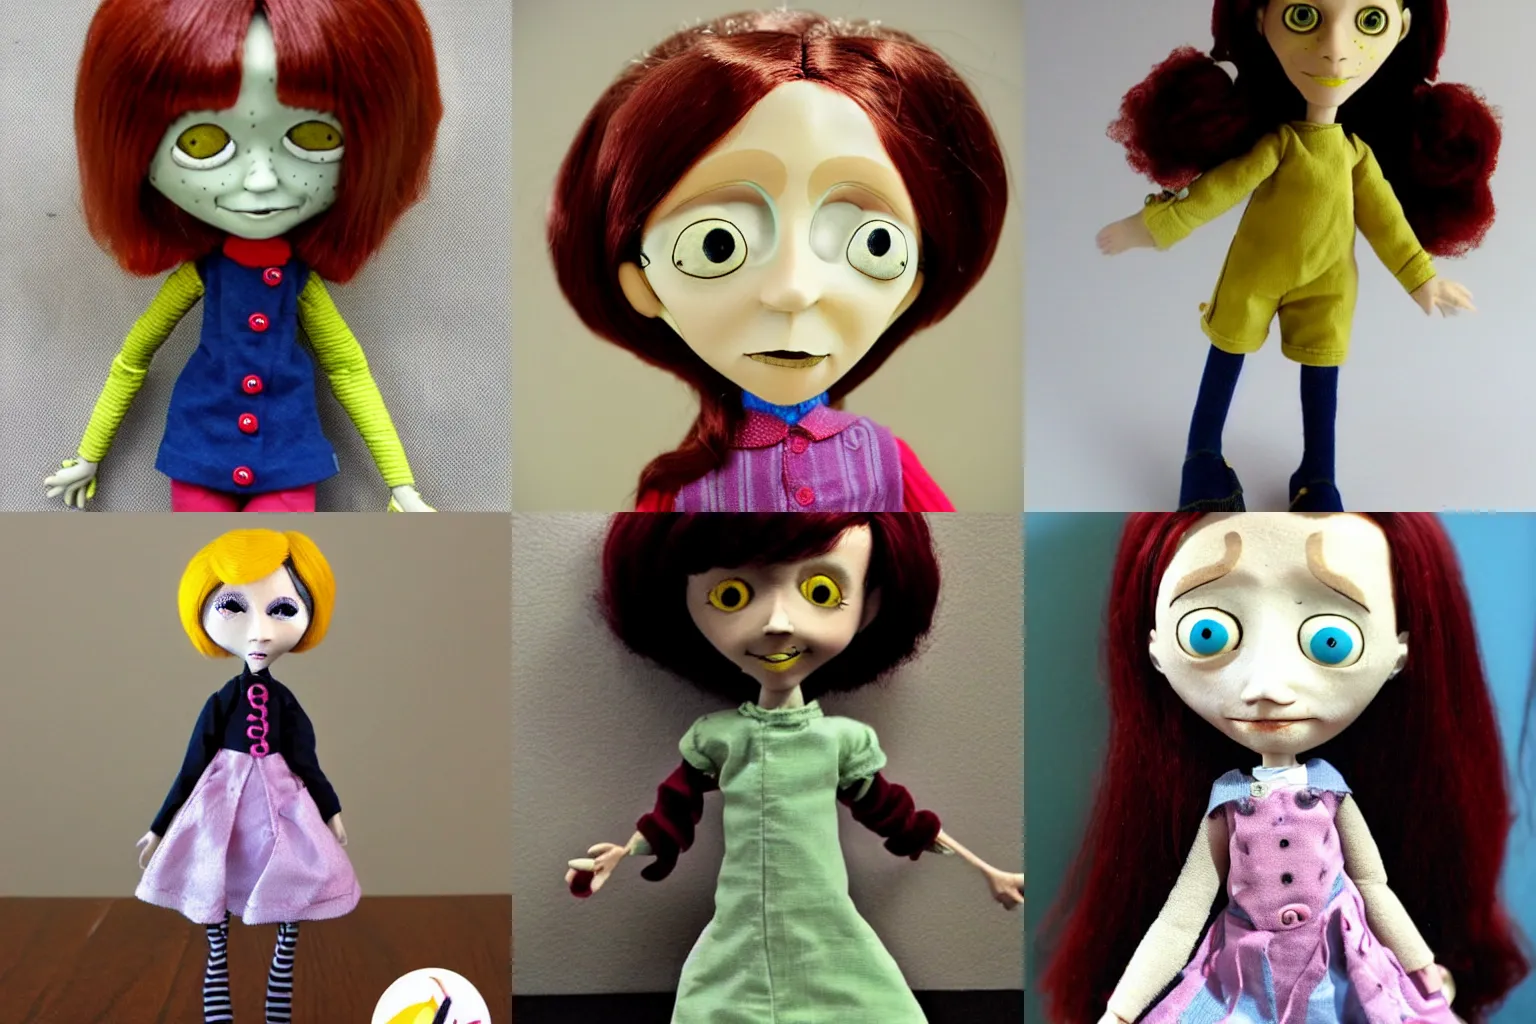 Prompt: Coraline doll, Coraline animation 2009, Coraline doll with button eyes and auburn hair